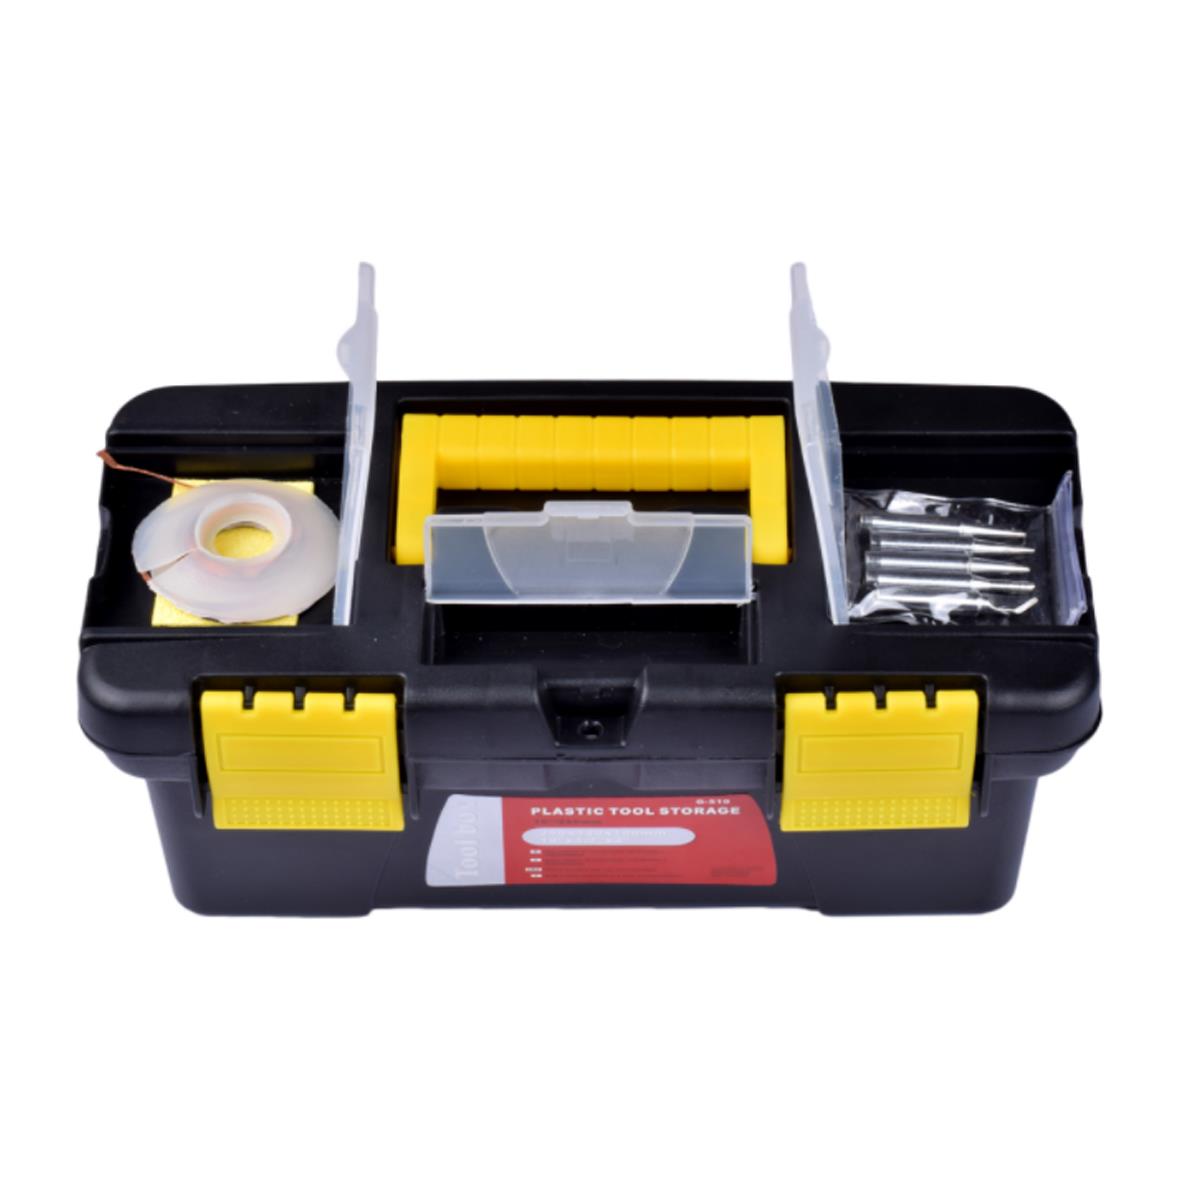 110220V-60W-Adjustable-Temperature-Electric-Welding-Soldering-Tools-Kit-with-Switch-1284249-5